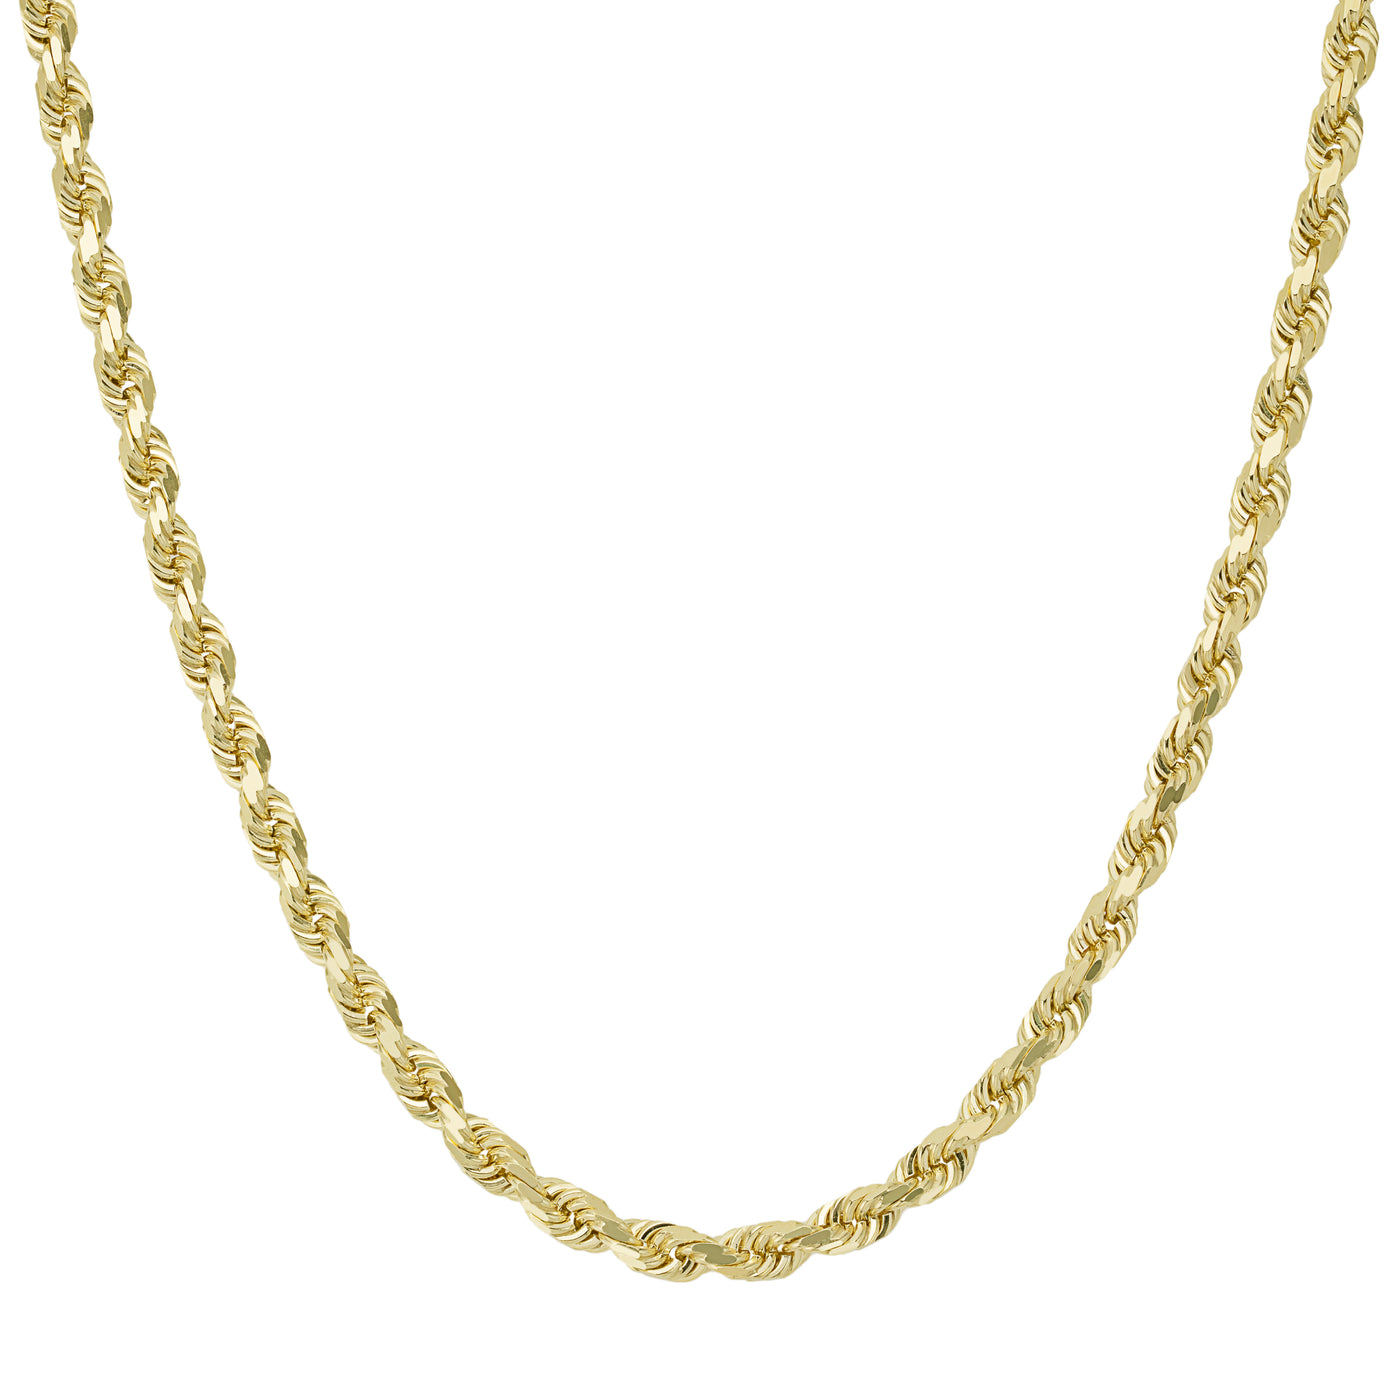 Rope Chain Necklace 14K Yellow Gold - Solid